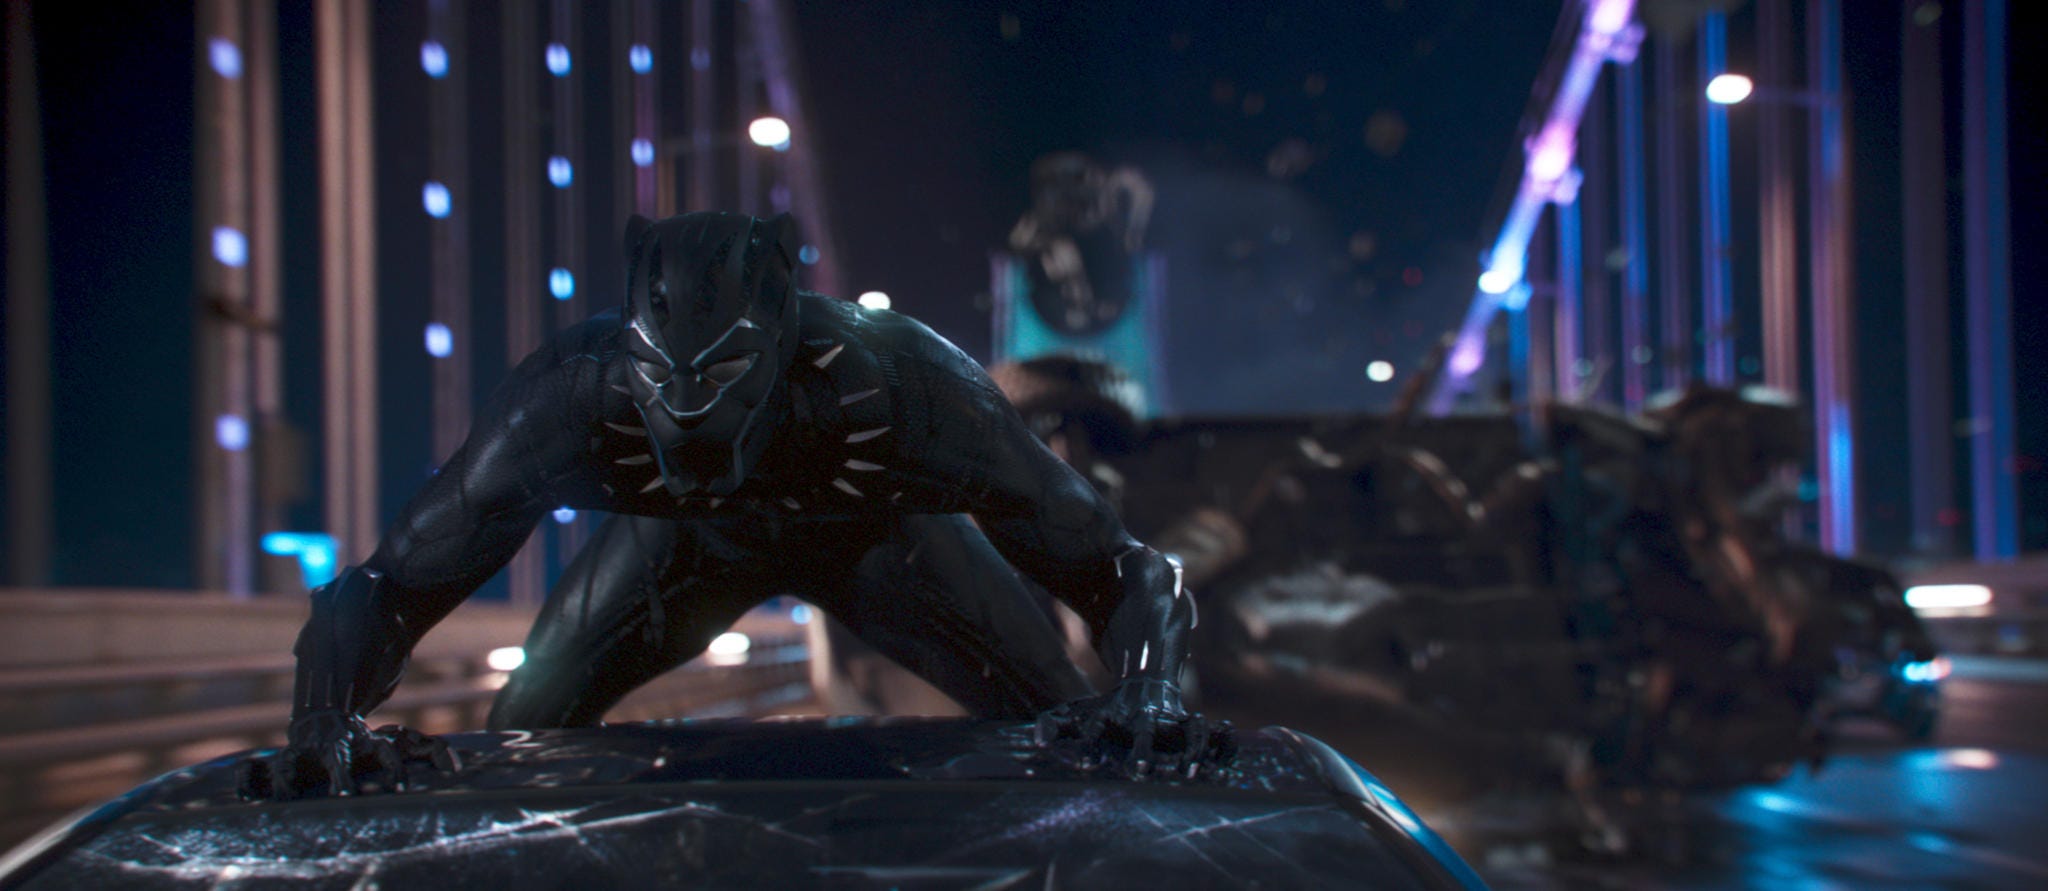 Black Panther 2: Release date, cast, rumors and theories - CNET